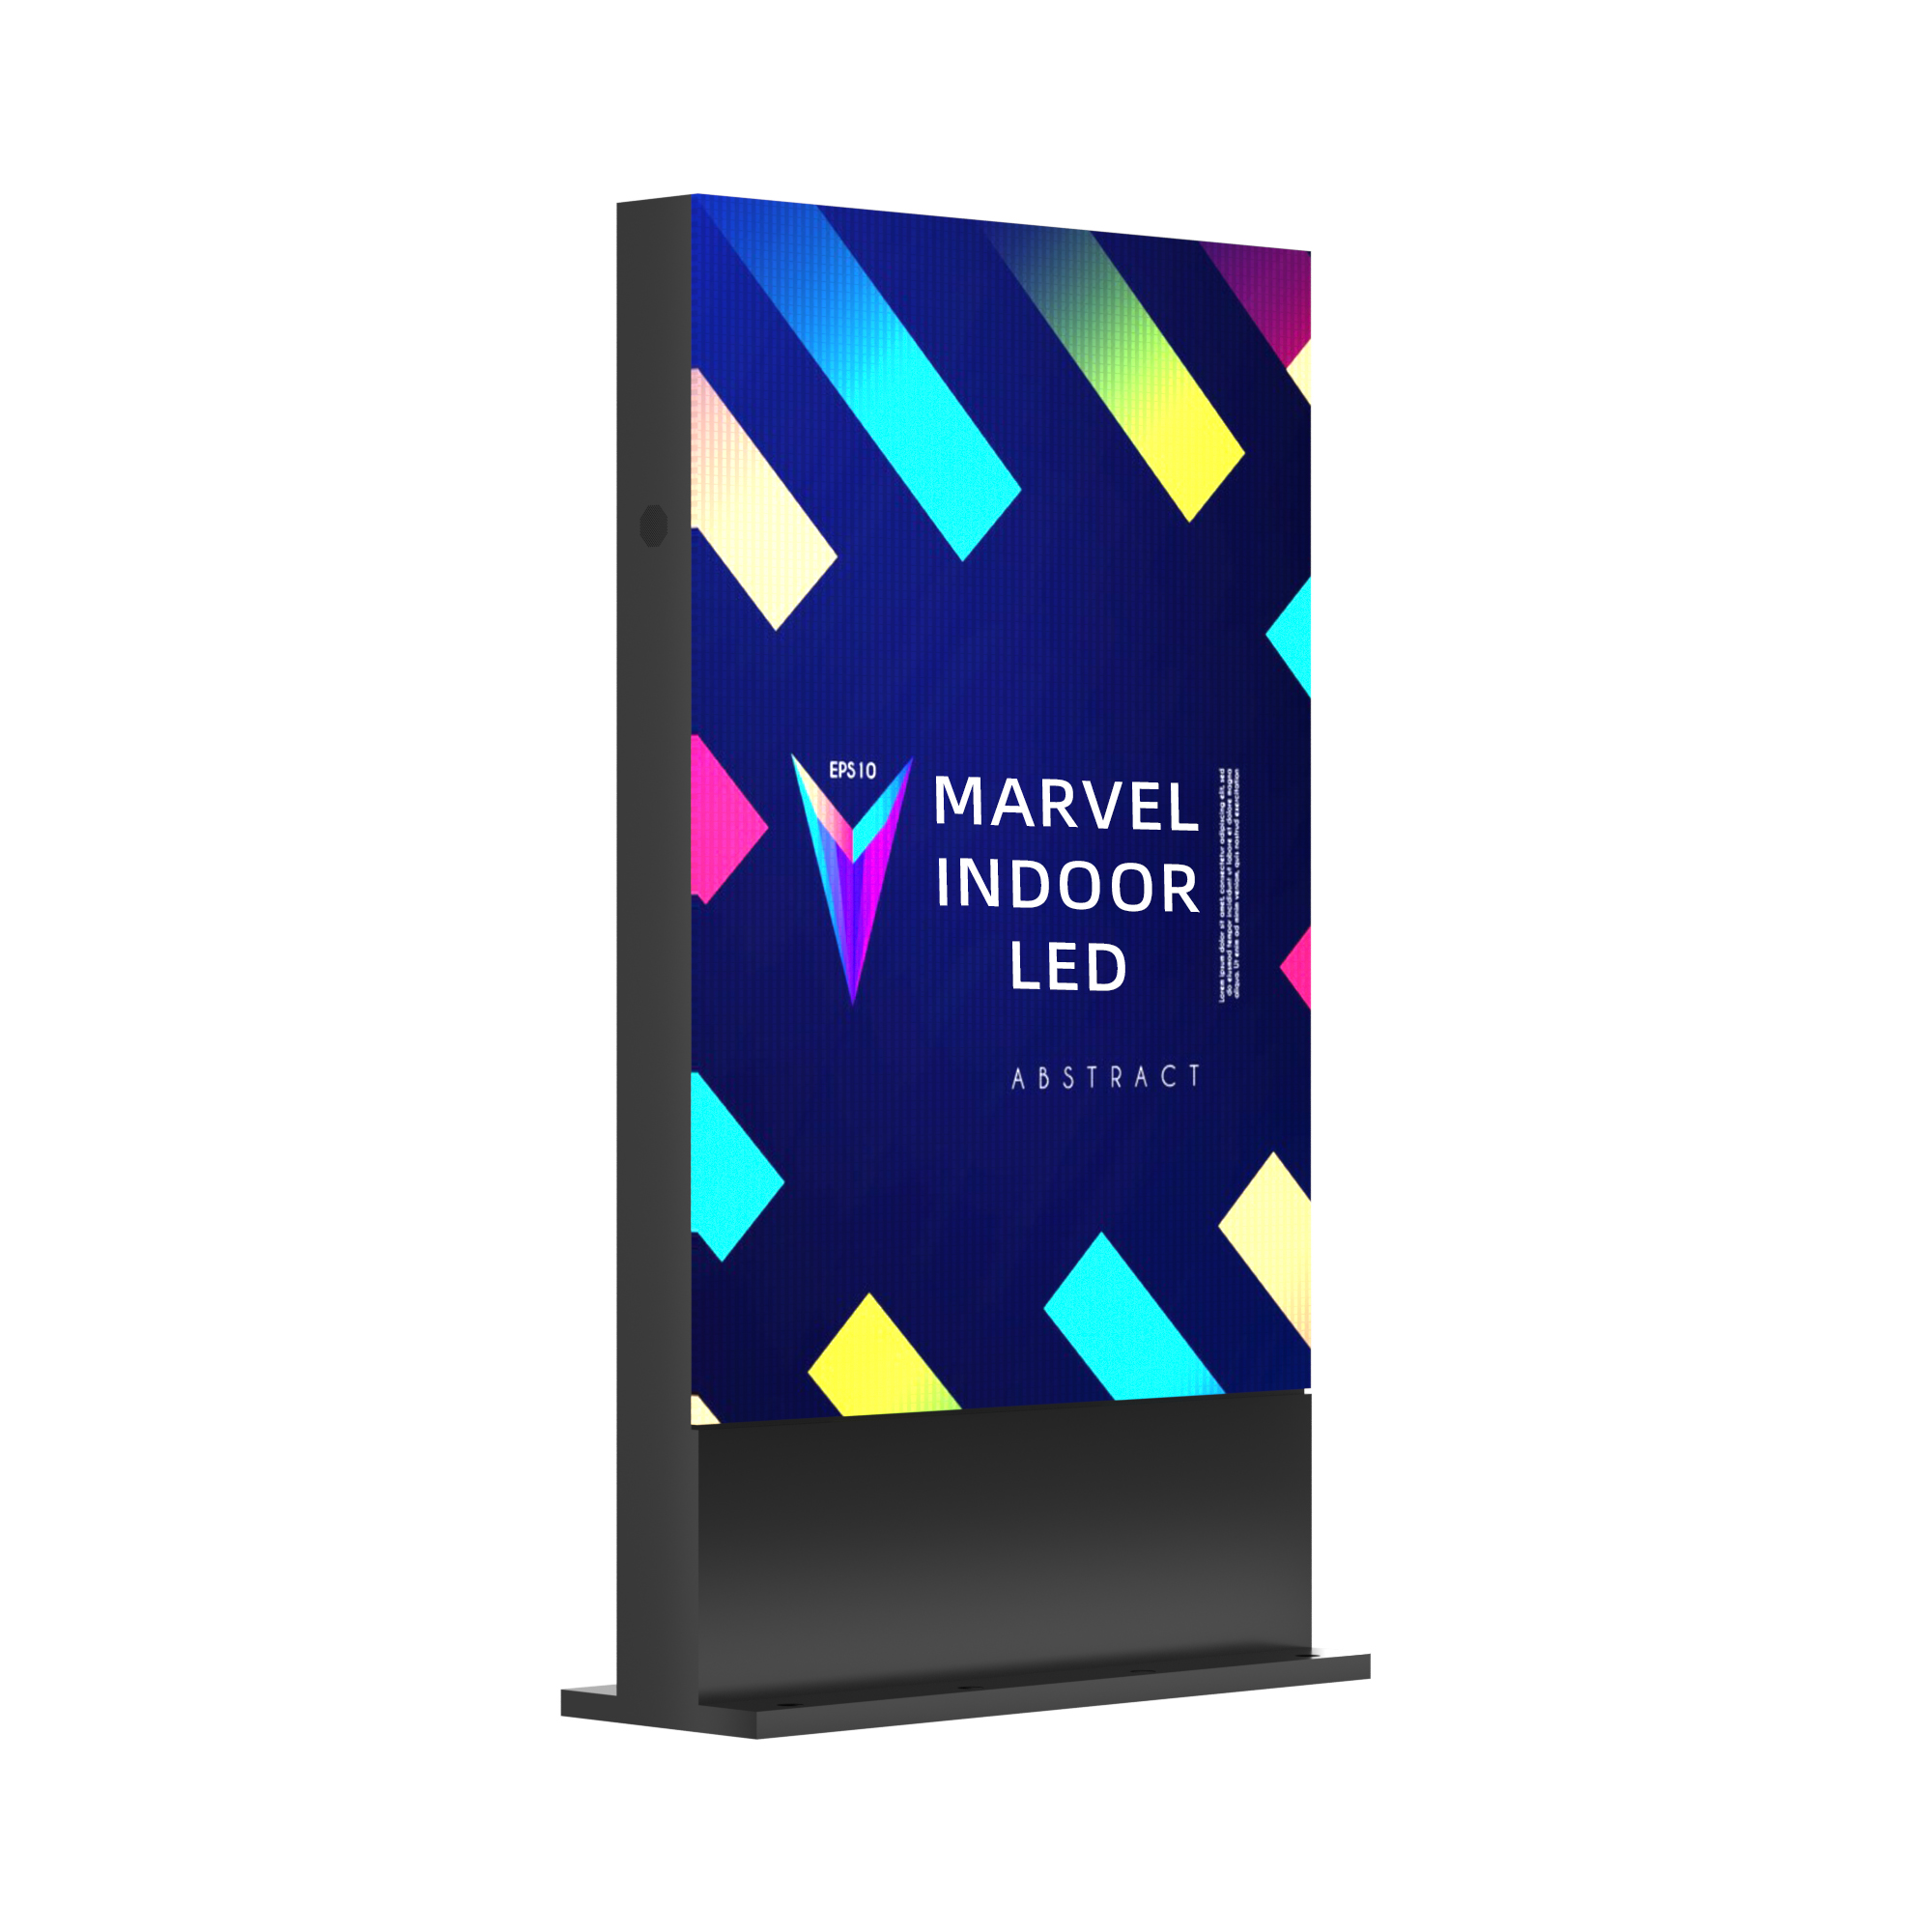 Marvel P2 P2.5 P3 P4 P5 High Brightness Full Color Indoor Indoor LED Video Wall Module Advertising Bright Screen Sign Floor Stand Display